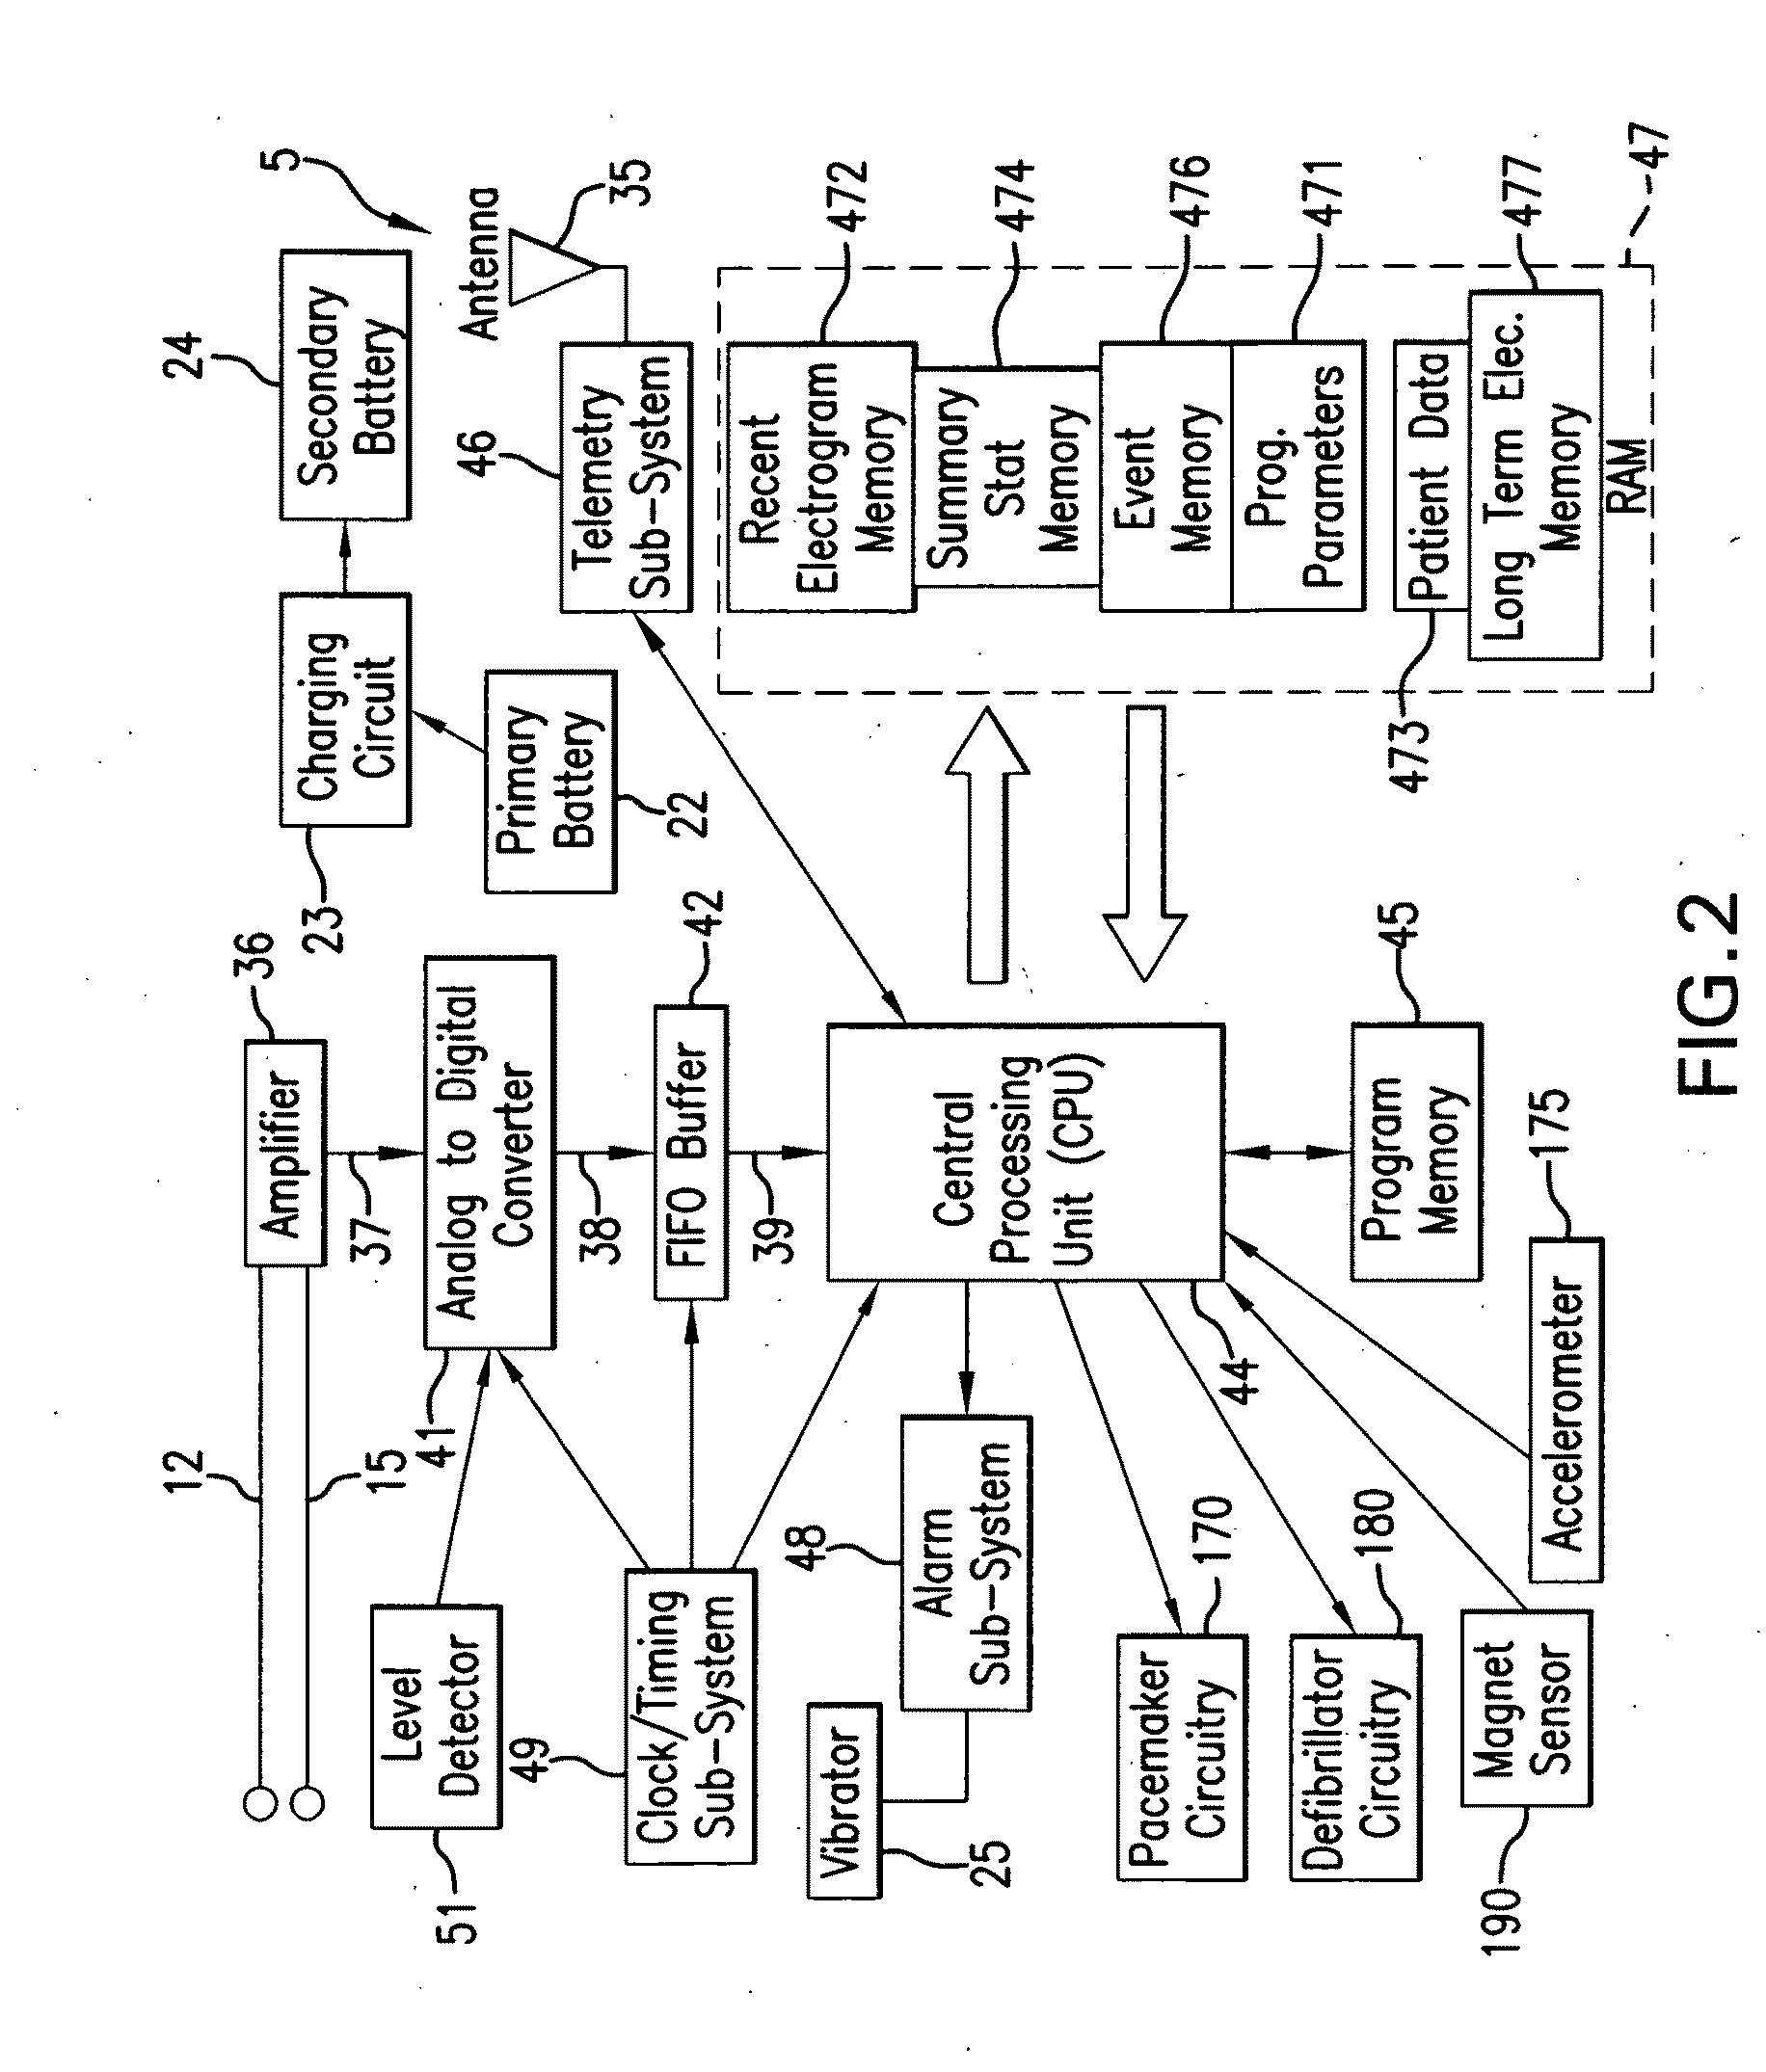 System and methods for the selective updating of heart signal parameter time series